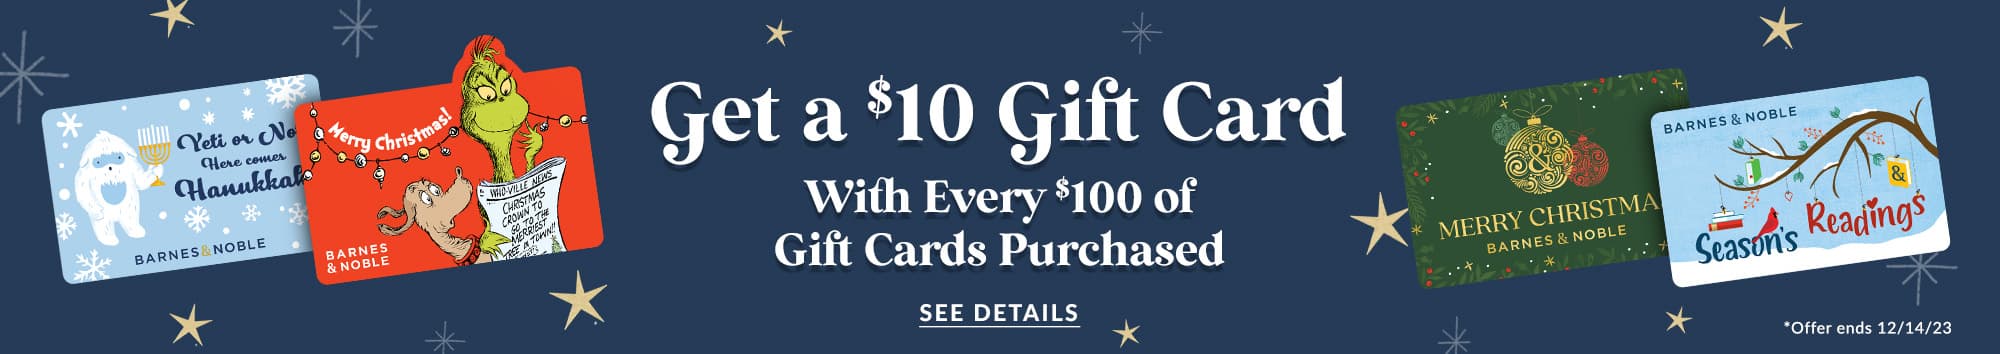 Get a $10 Gift Card with every $100 of gift cards purchased